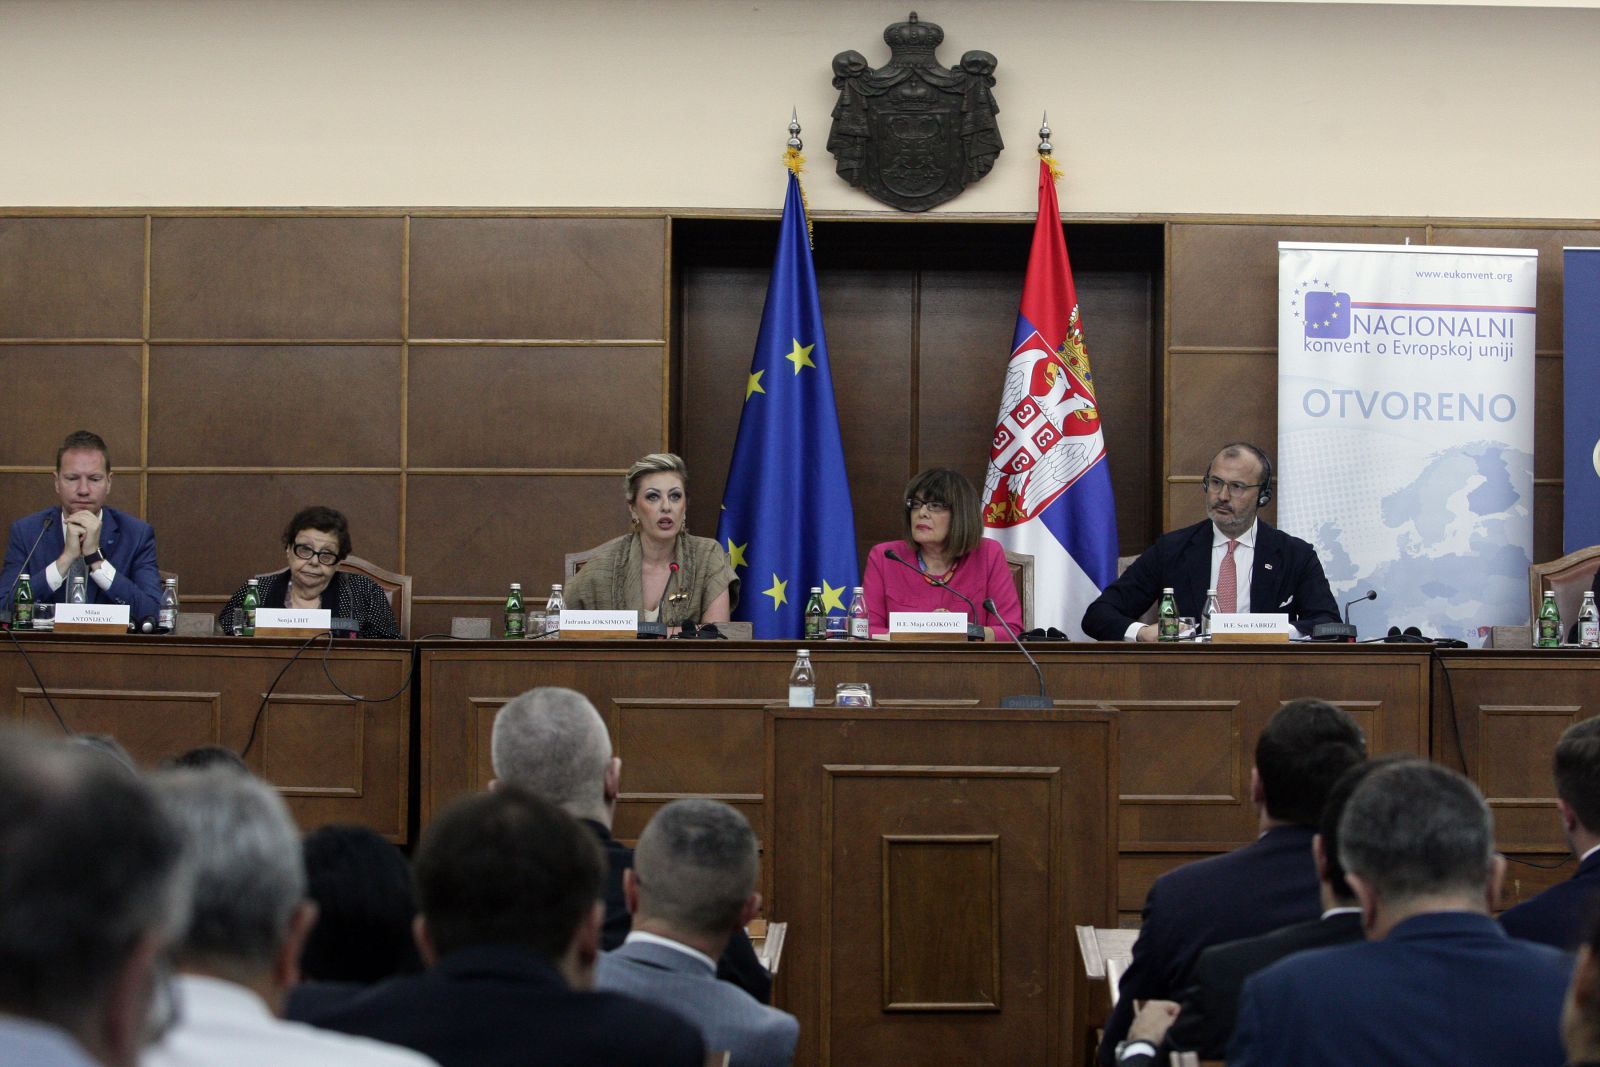 J. Joksimović: The Balkans incorporable into the EU, Serbia’s place is within it